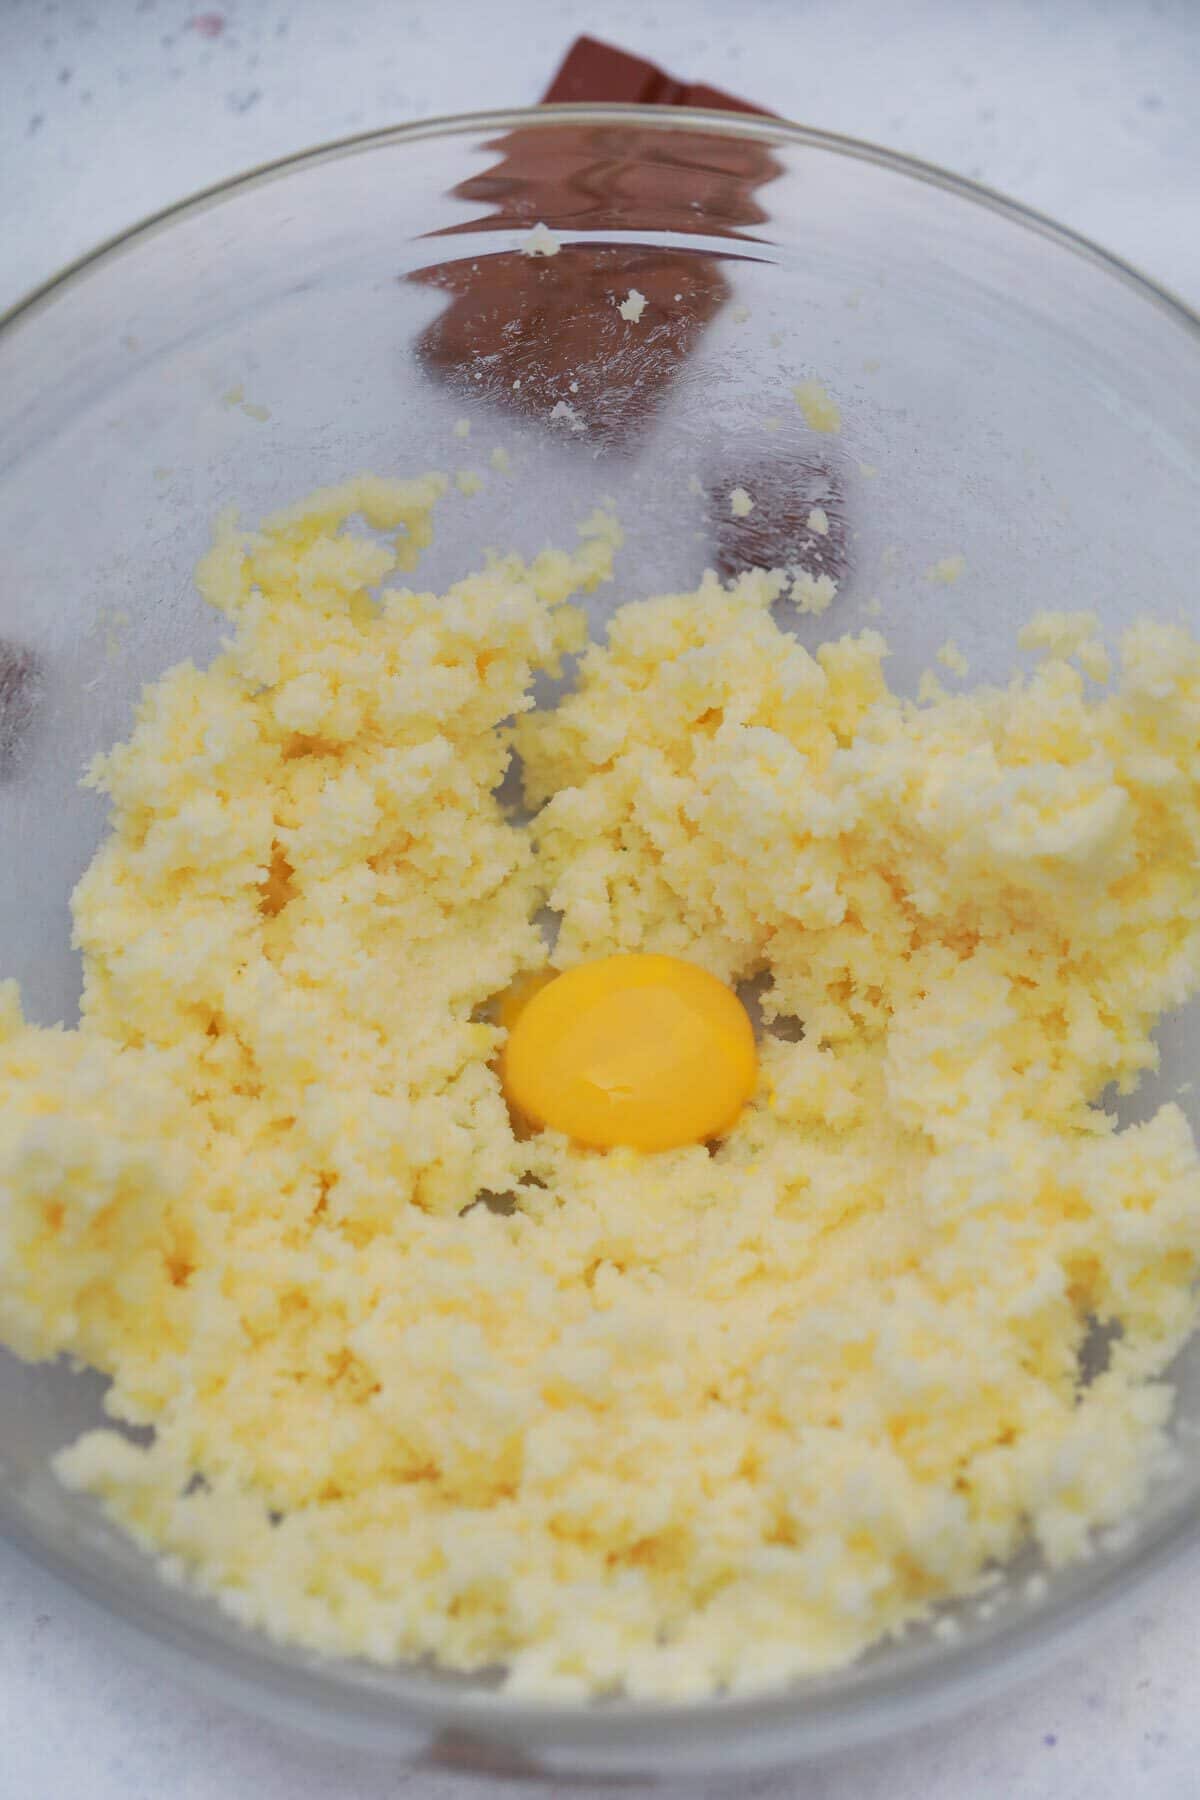 Butter and egg in bowl